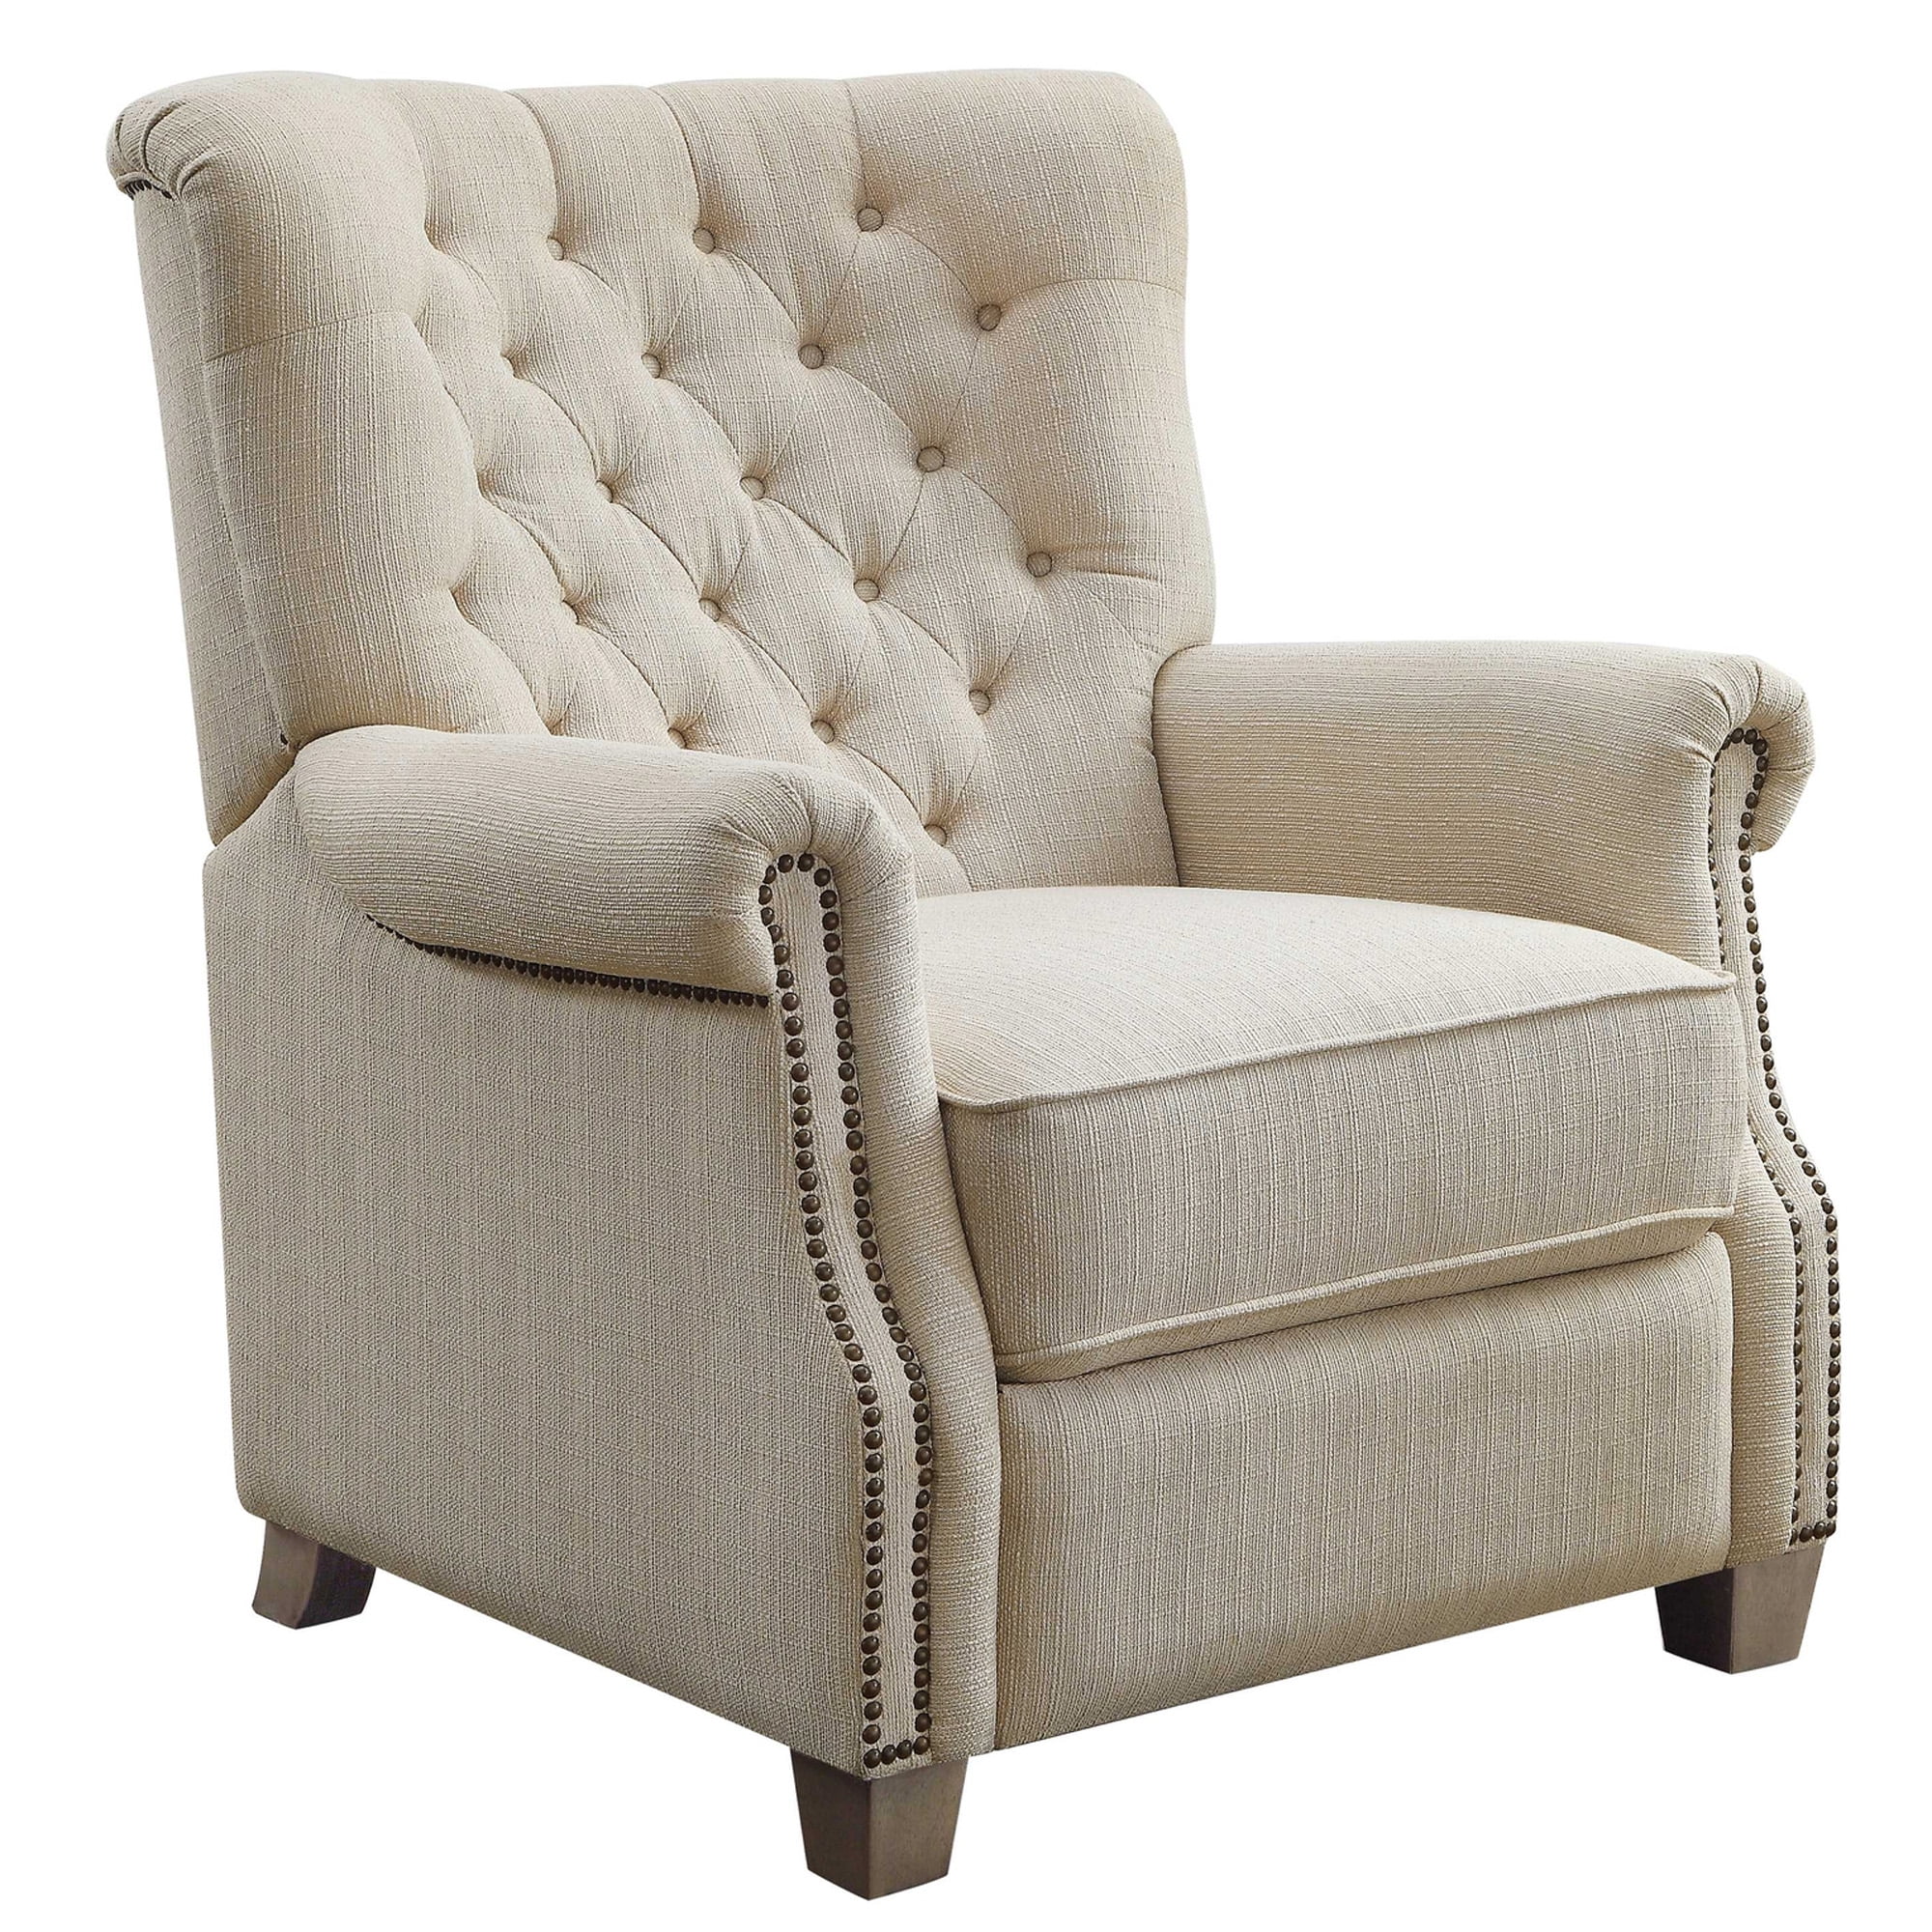 Better Homes and Garden Tufted Push Back Recliner, Beige